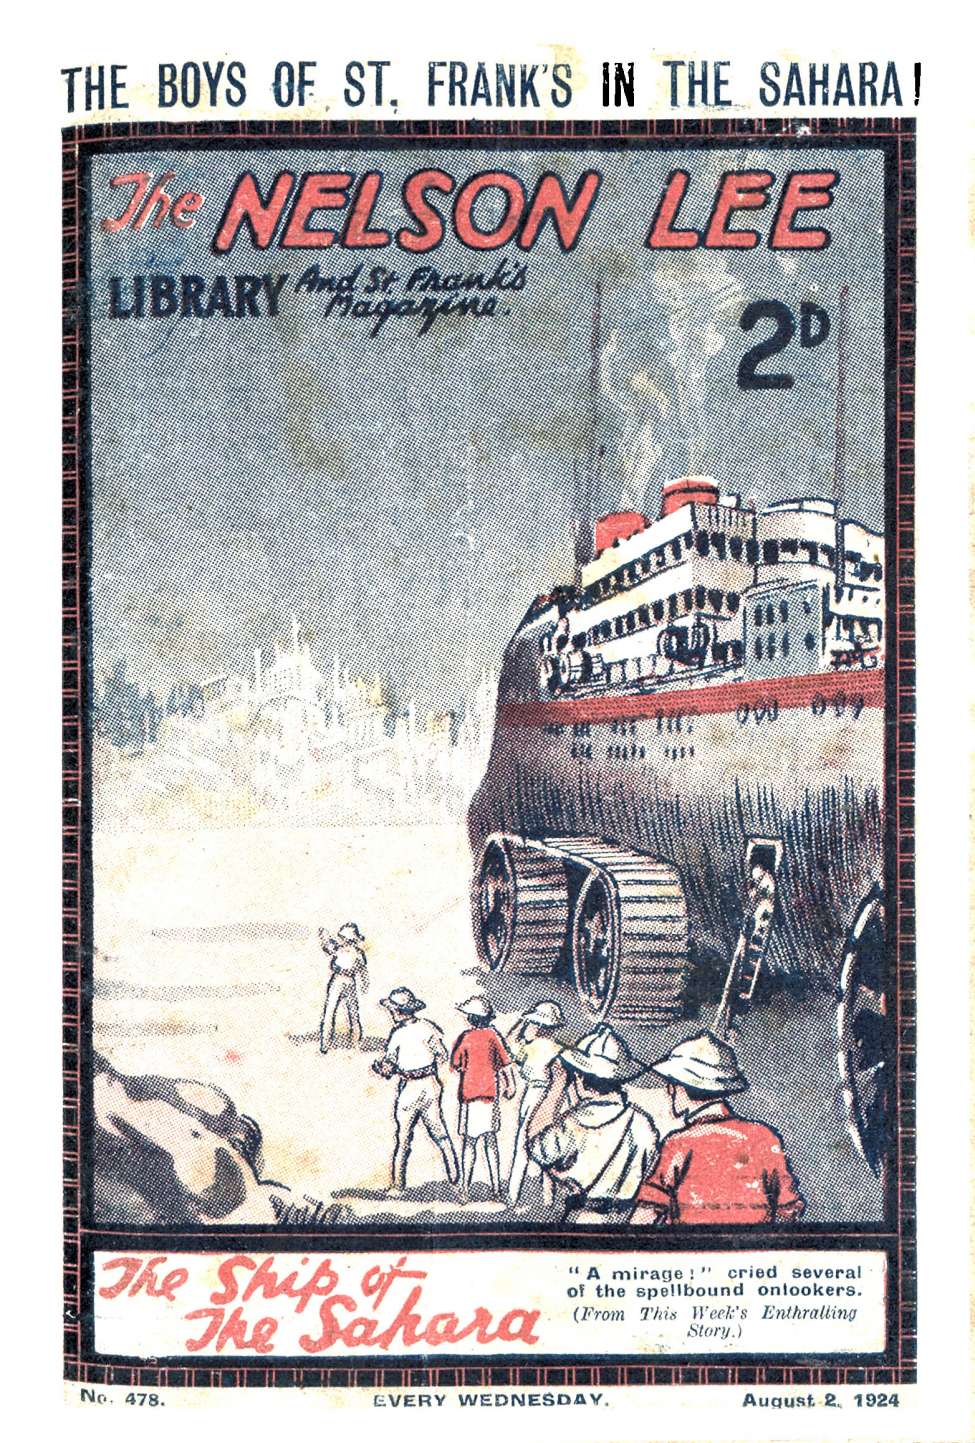 Book Cover For Nelson Lee Library s1 478 - The Ship of the Sahara